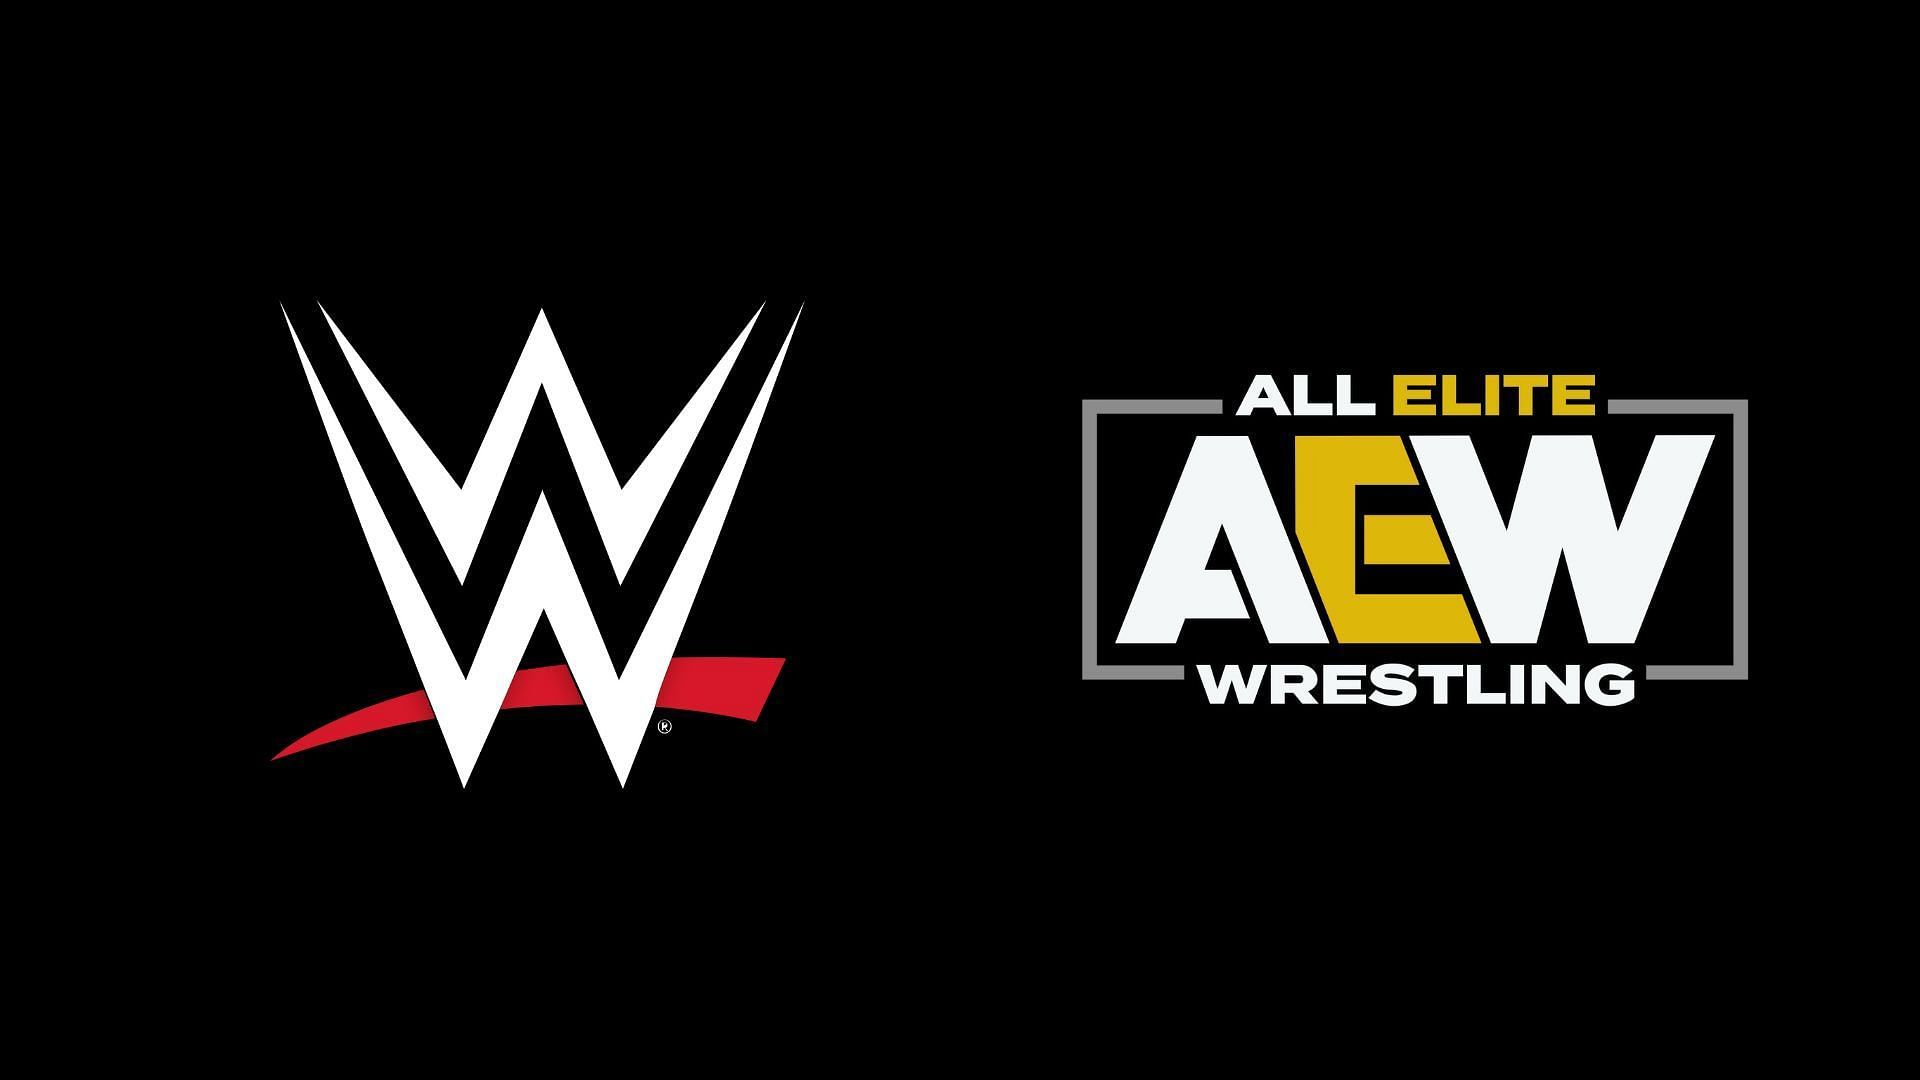 AEW has partnership deals with many wrestling promotion around the world